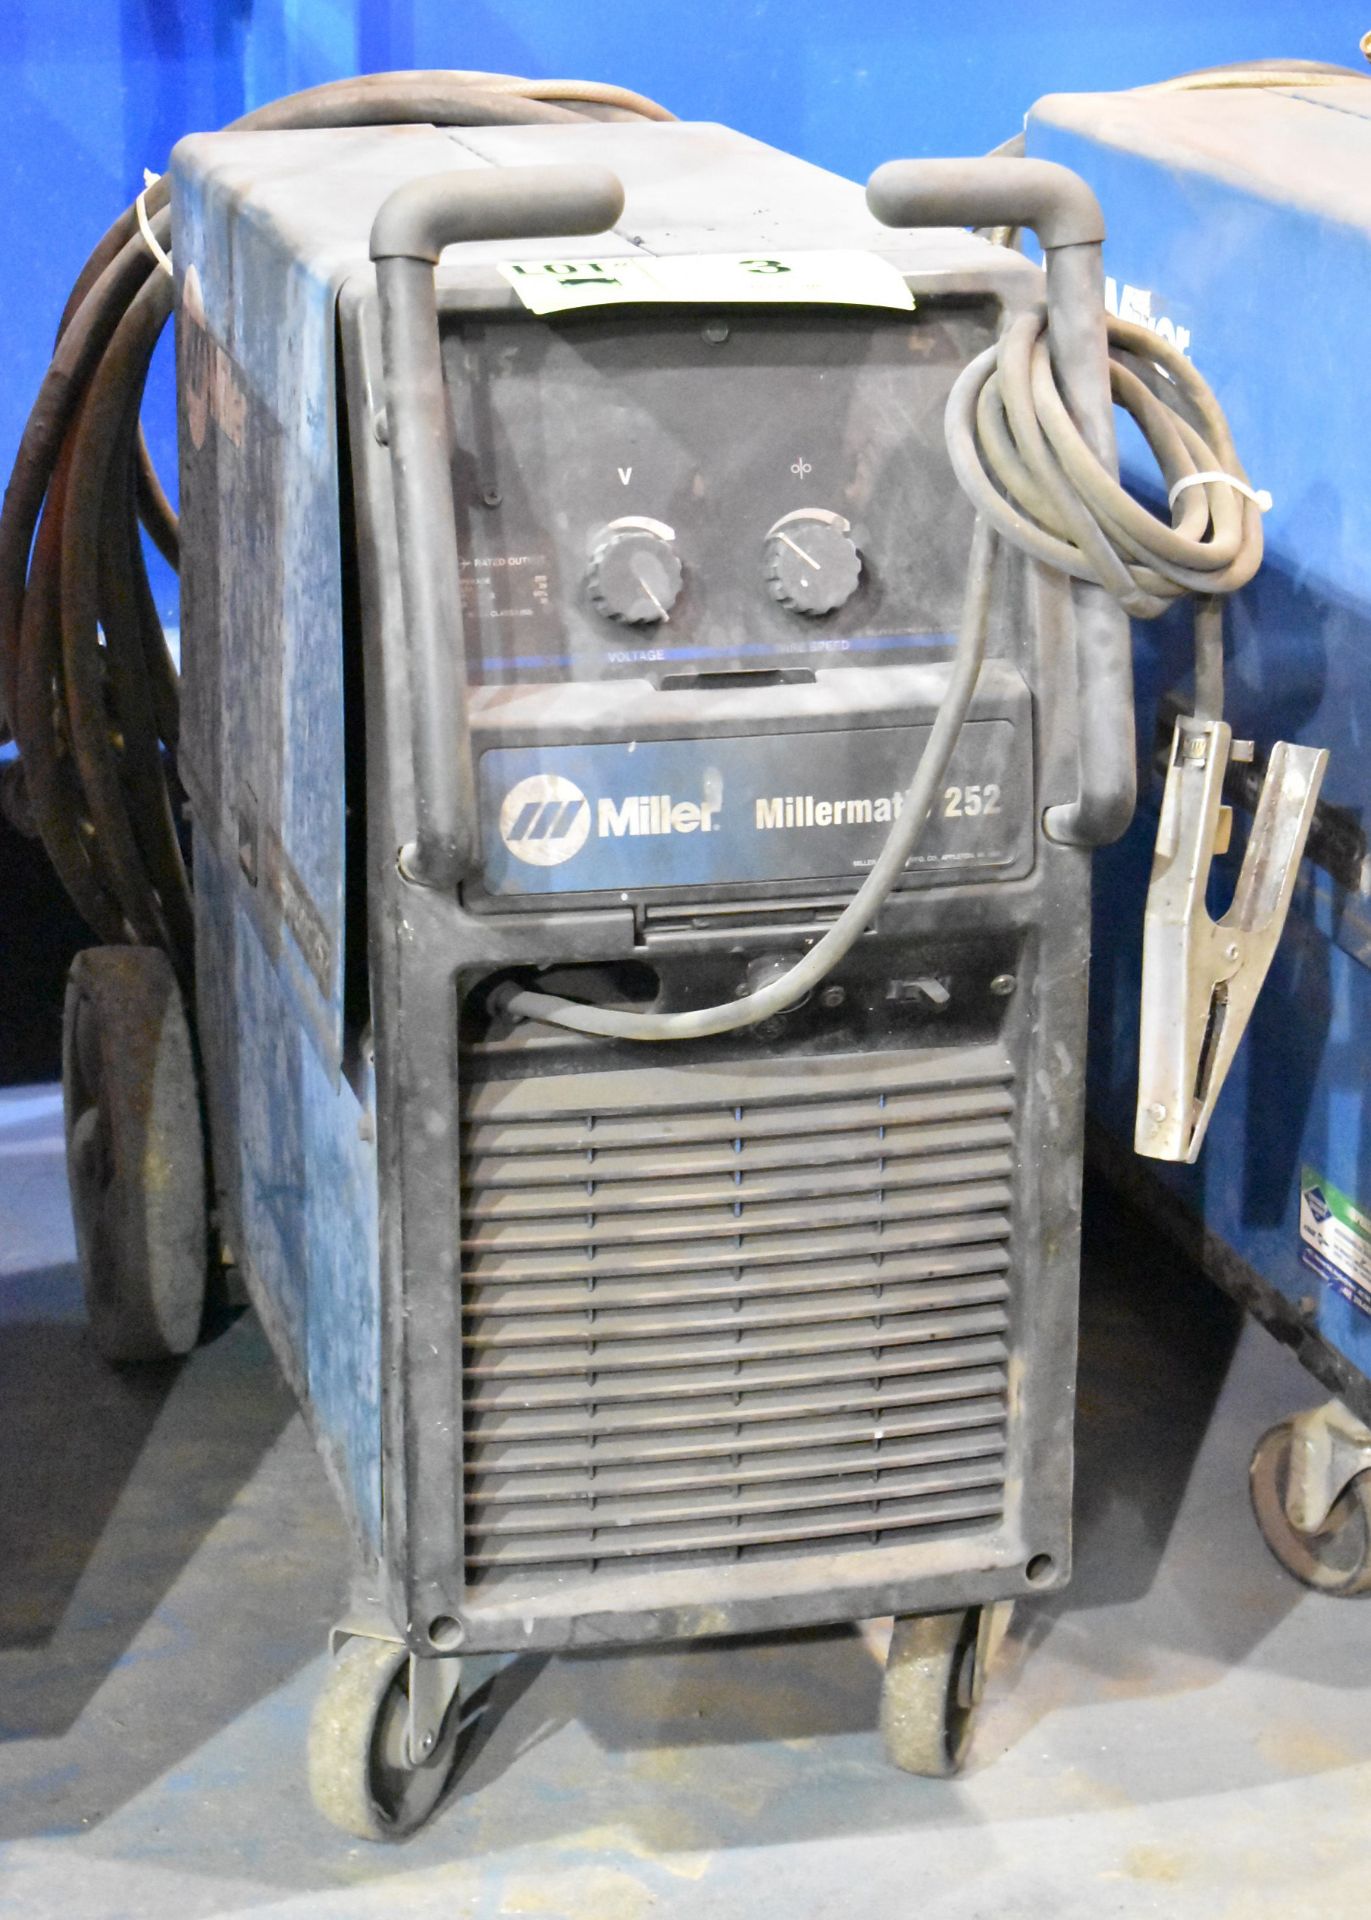 MILLER MILLERMATIC 252 MIG WELDER WITH CABLES AND GUN, S/N MJ200512N